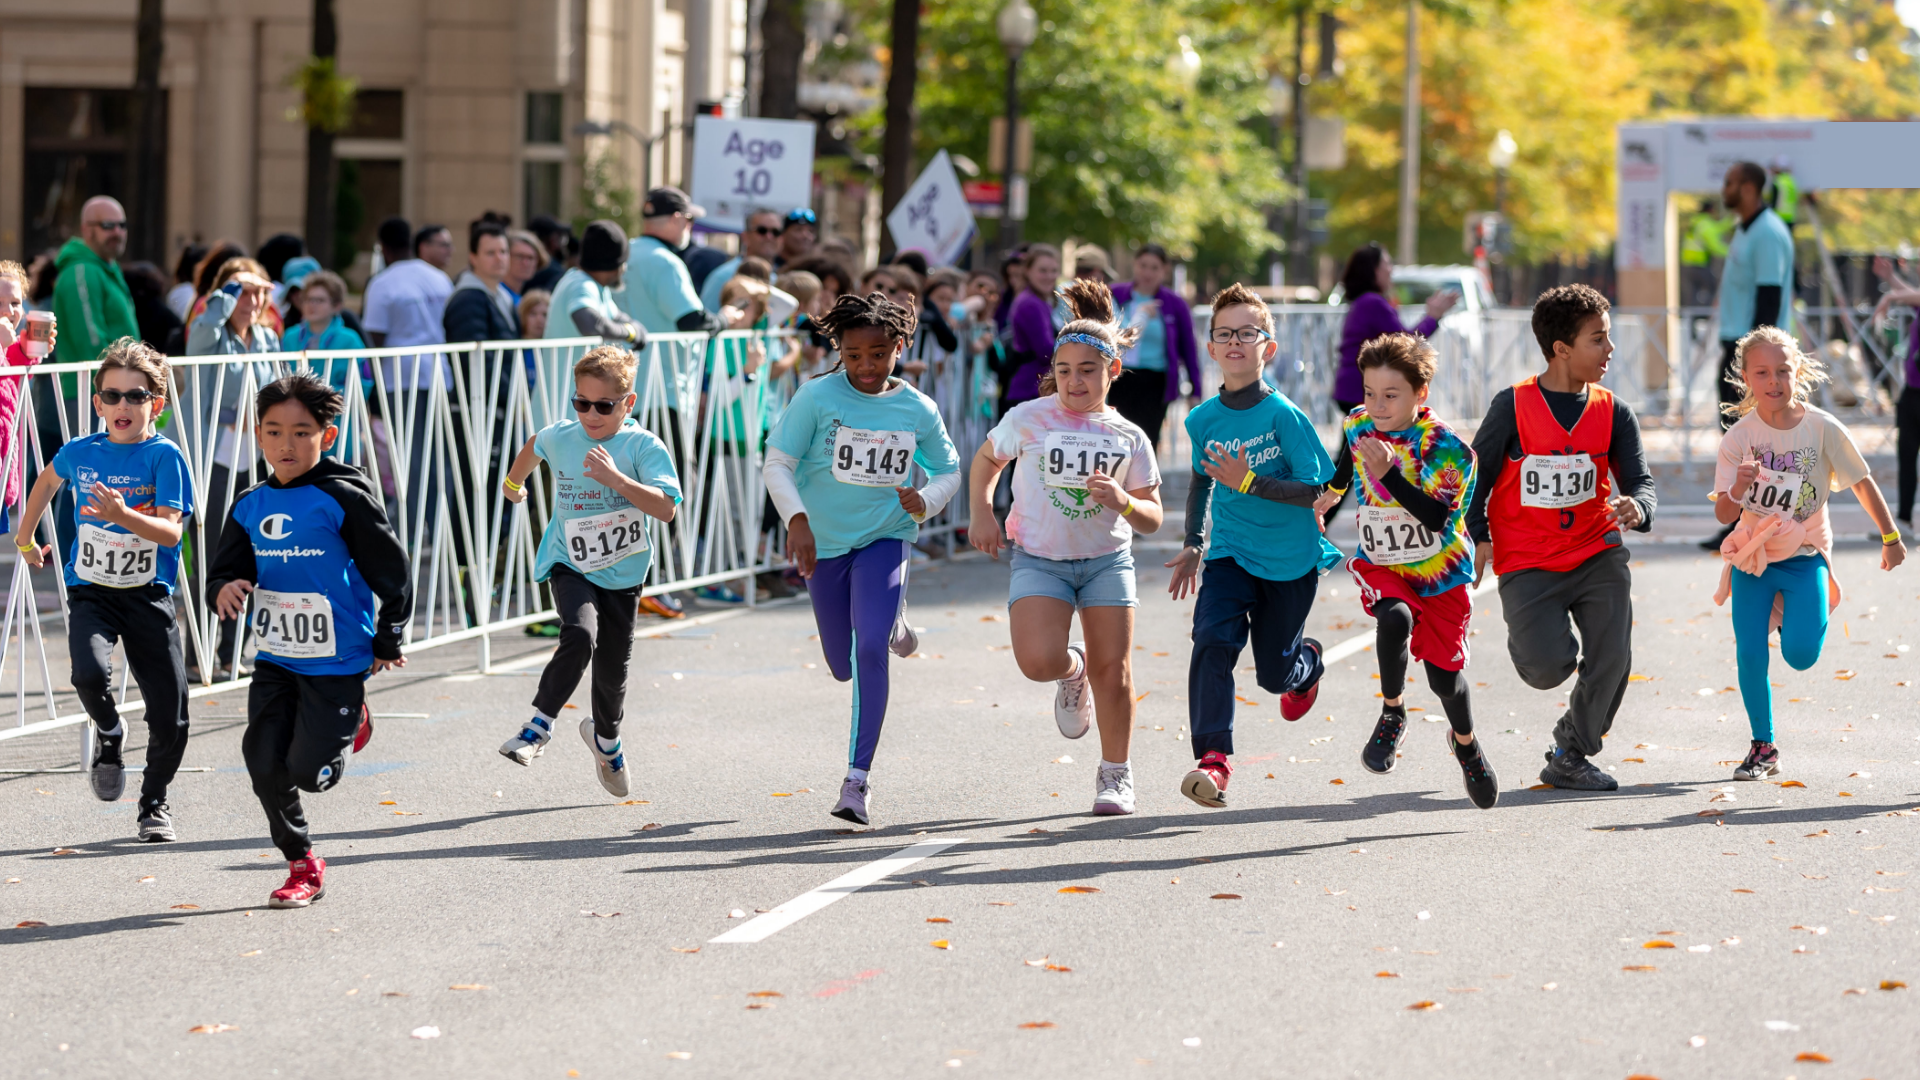 Group of children running in a race.